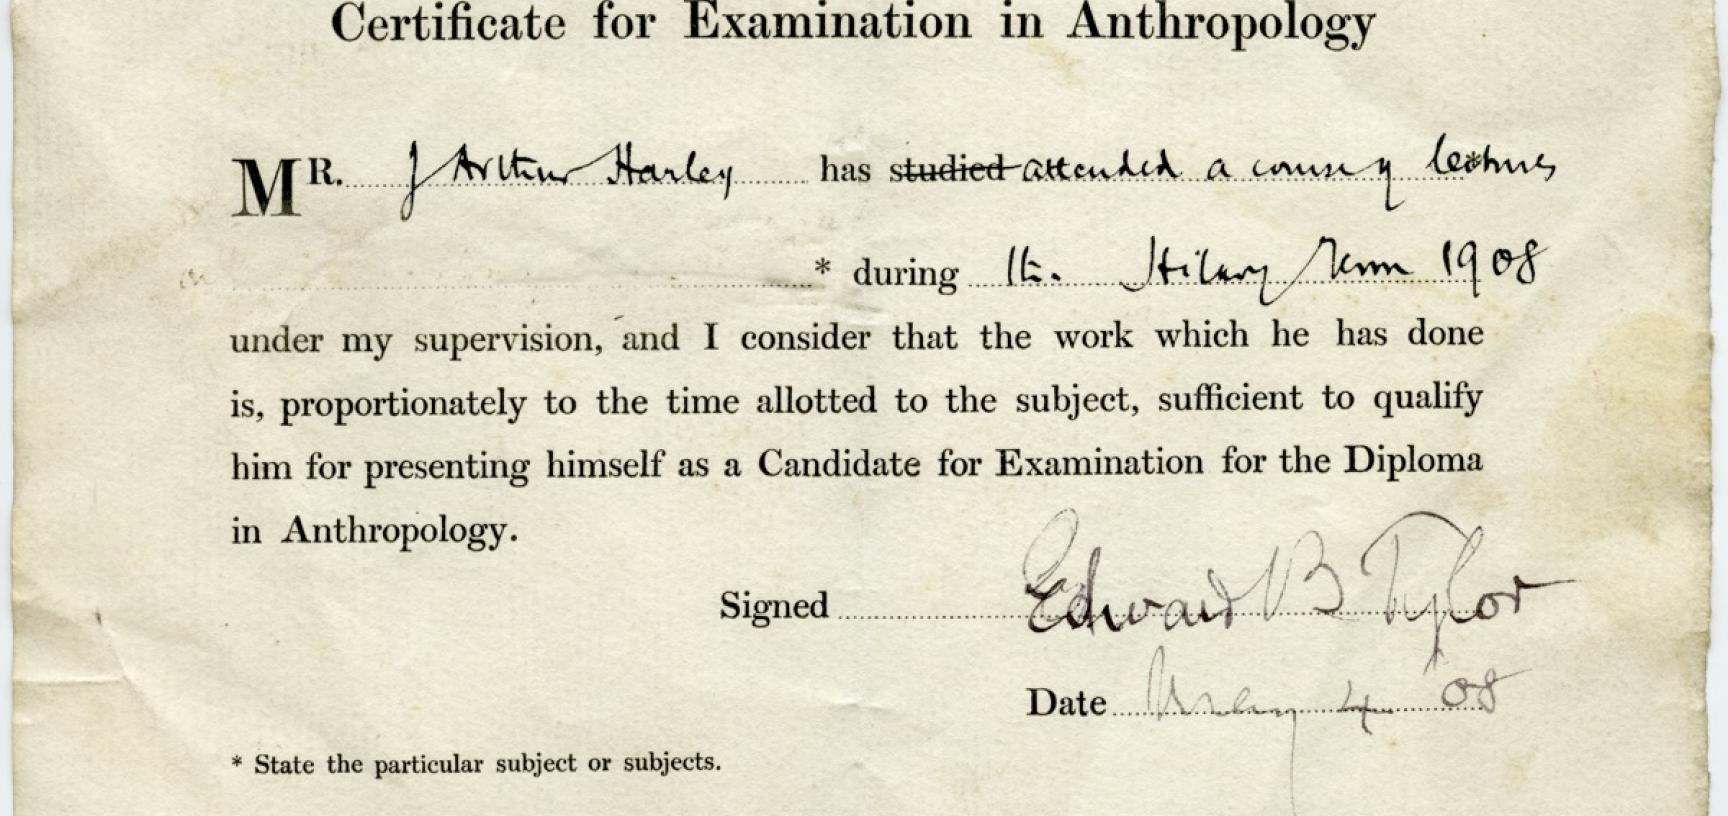 ‘Certificate for Examination in Anthropology’ during Harley’s studies at the University of Oxford. ‘I consider that the work which he has done’, signed Prof Edward B. Tylor, ‘is, proportionately to the time allotted to the subject, suf